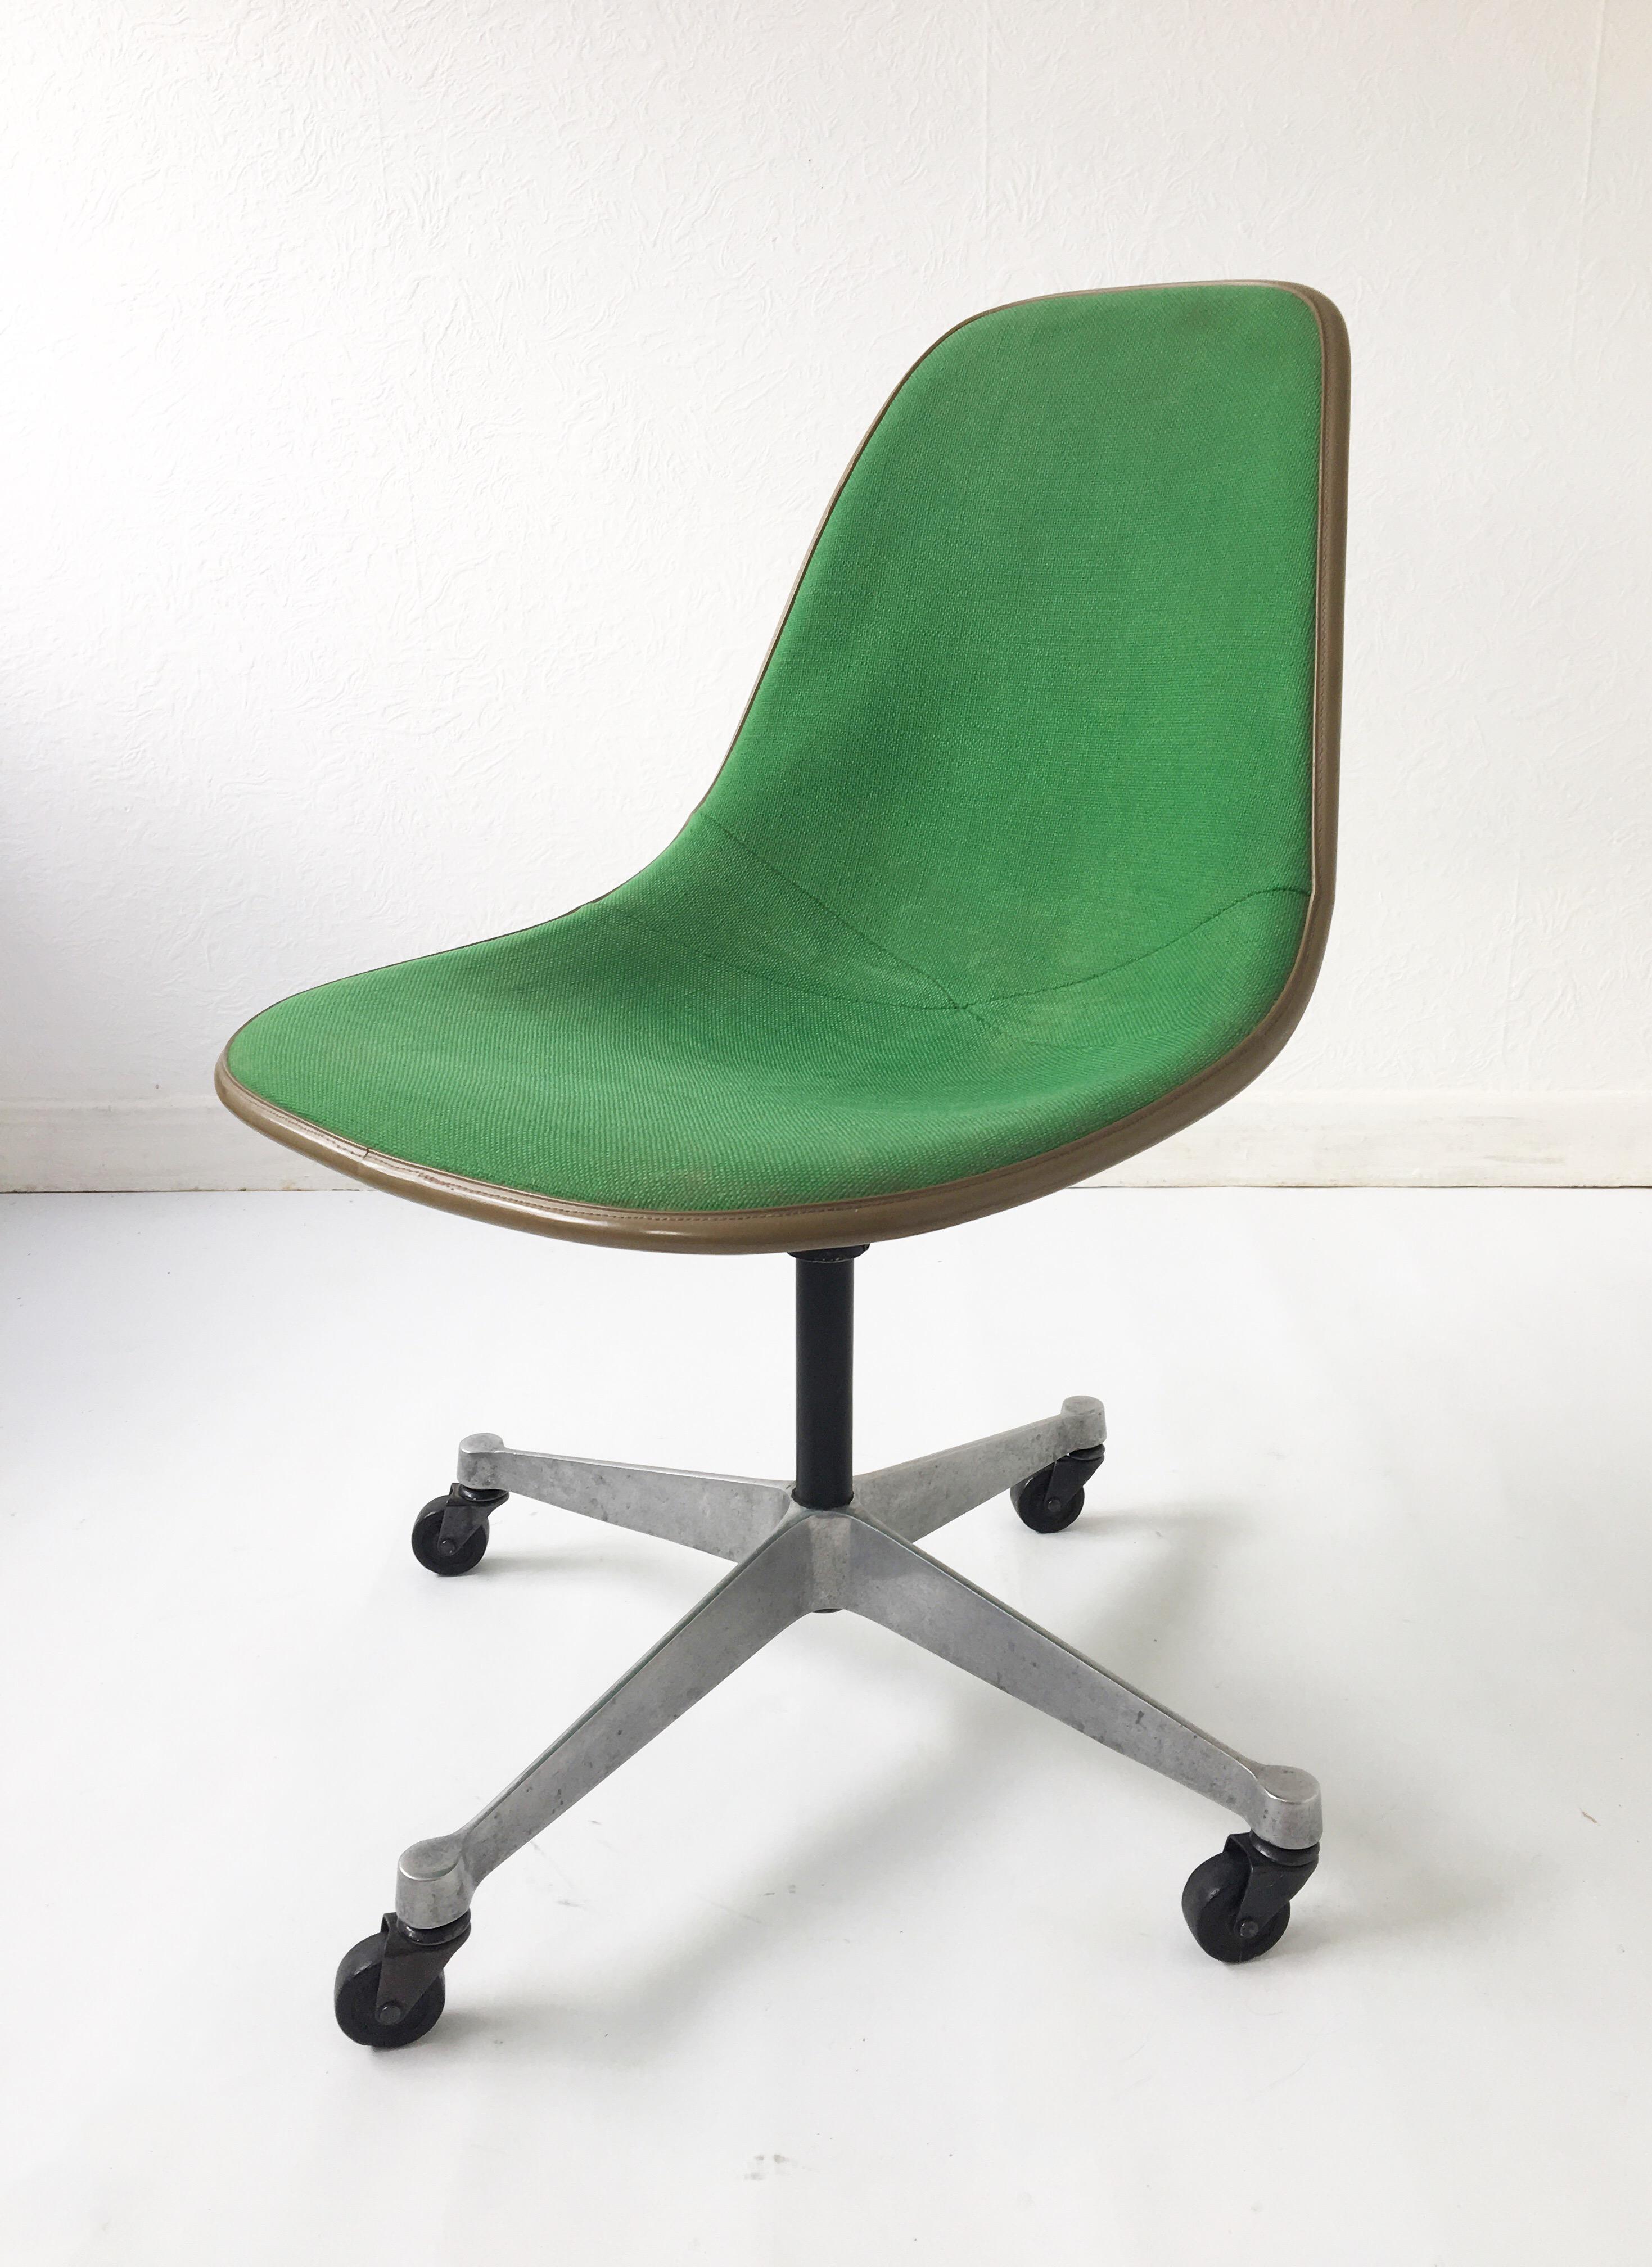 Green upholstered Eames PSC swivel chair produced by Herman Miller, circa 1960. Green upholstered fibreglass shell on a ‘contract’ swivel base with casters.